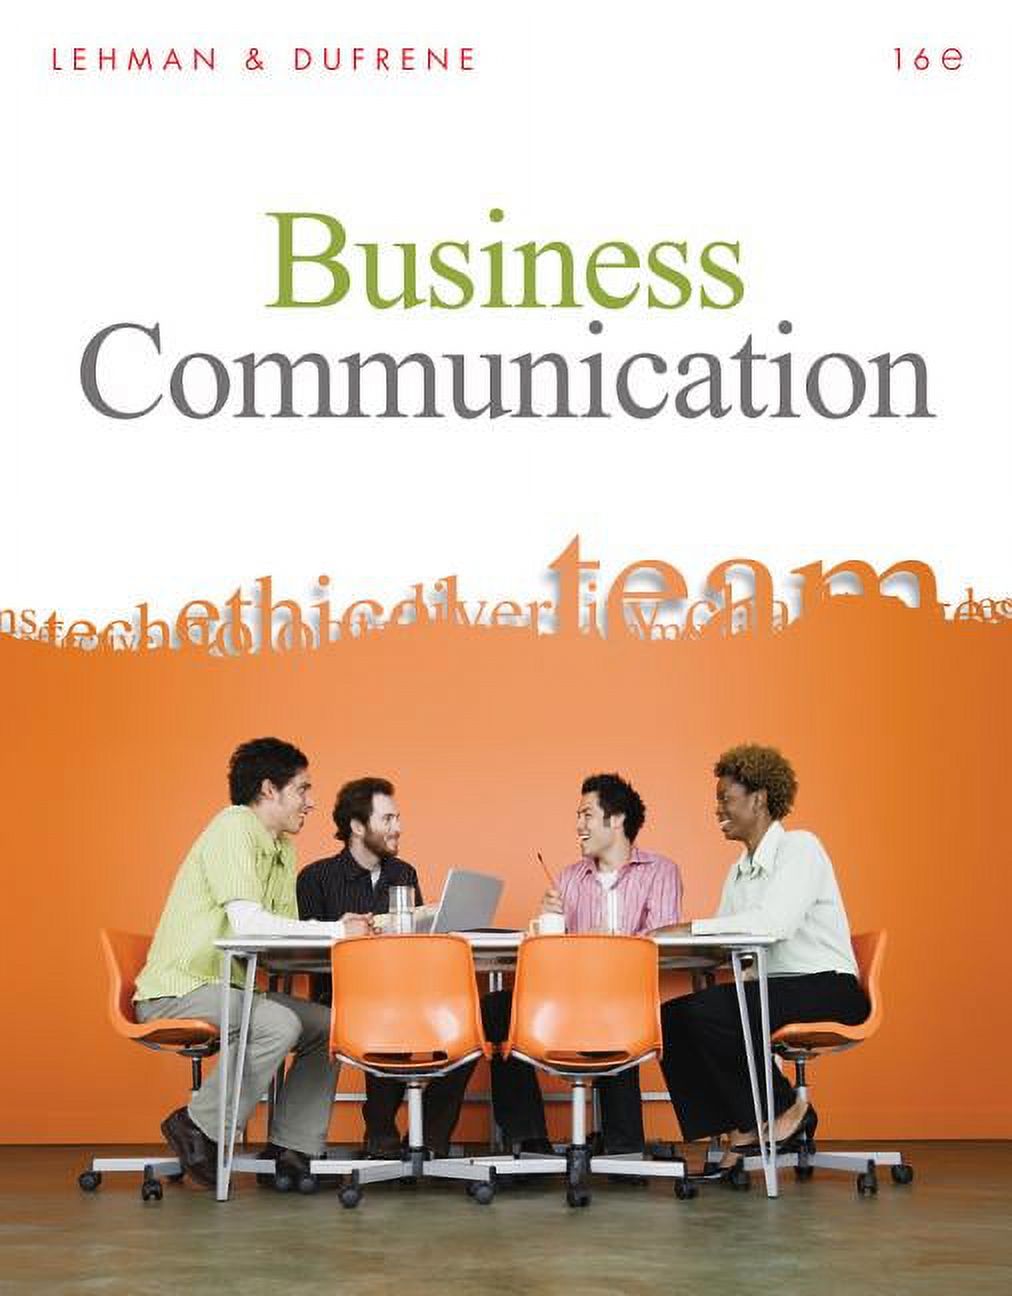 Business Communication (with Teams Handbook) (Hardcover) - image 1 of 1